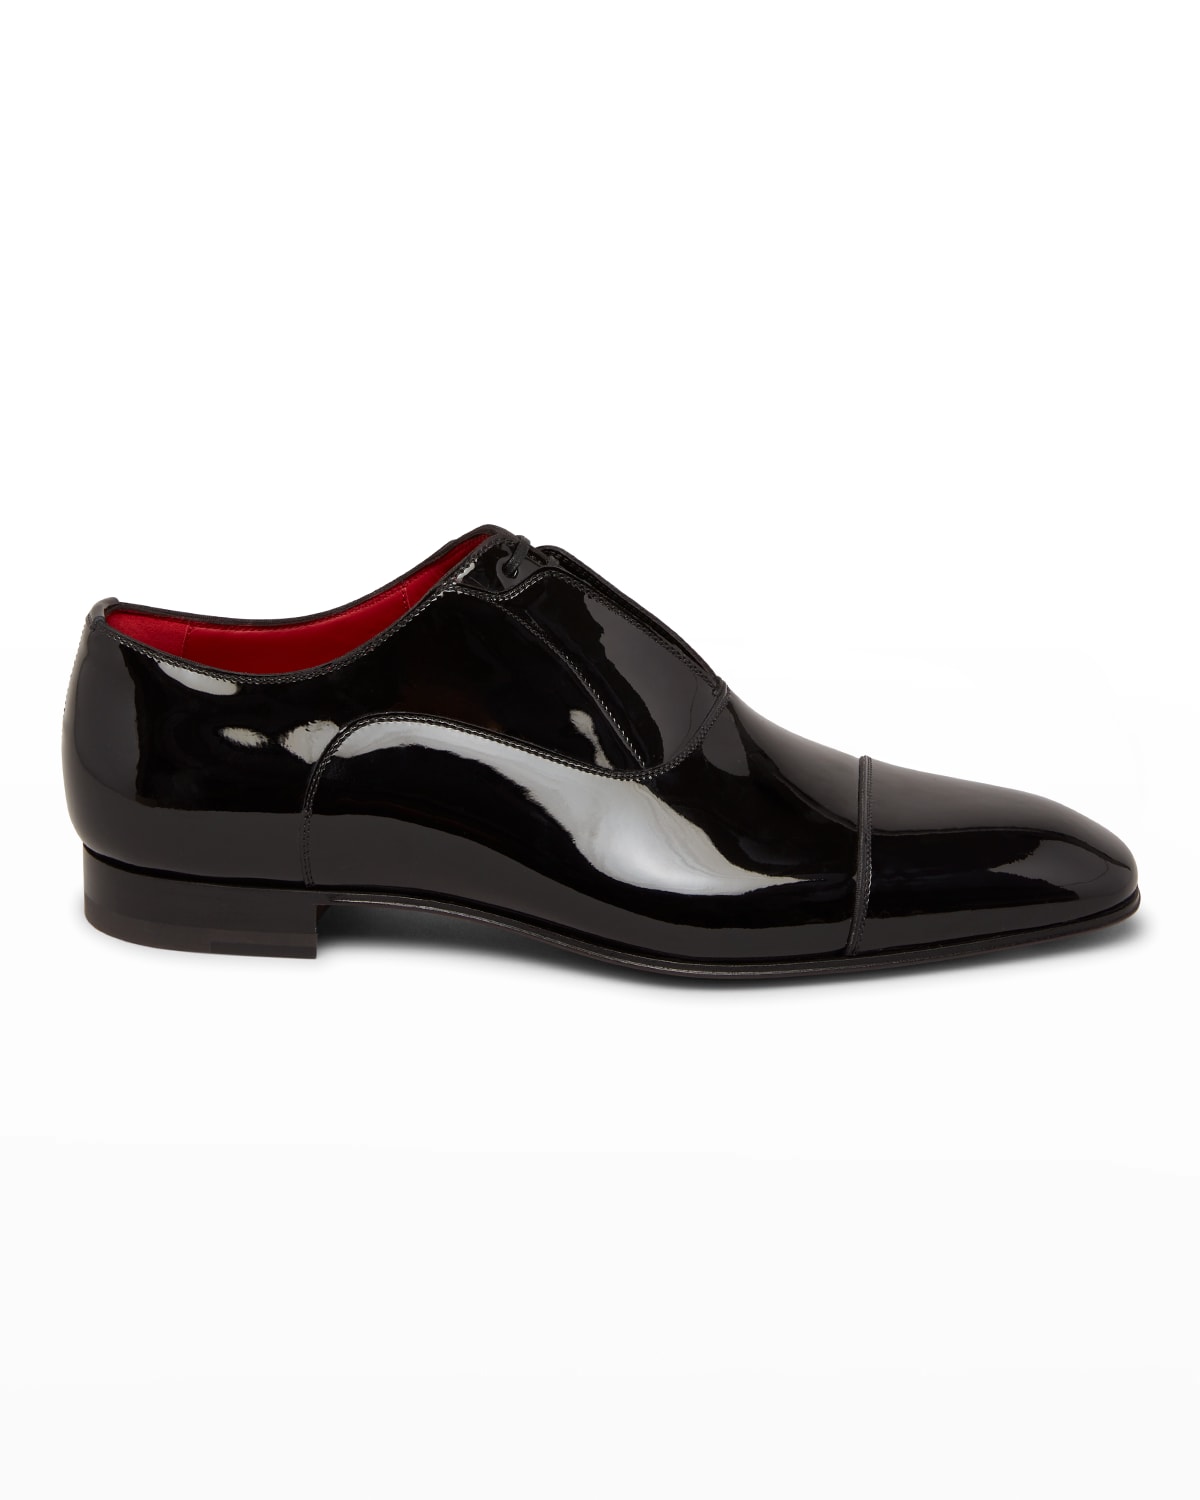 Christian Louboutin Men's Greghost Patent Leather Loafers In Black/lin Loubi